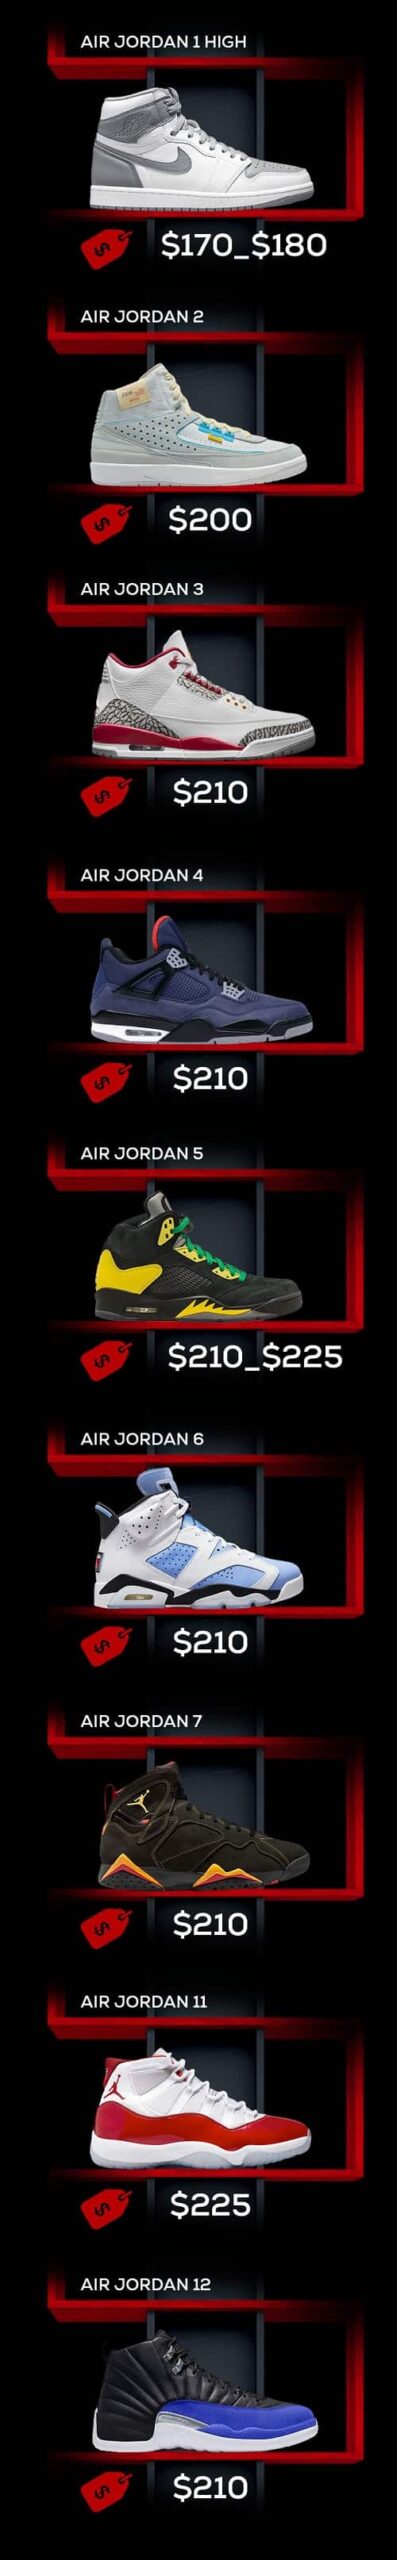 all jordans and prices